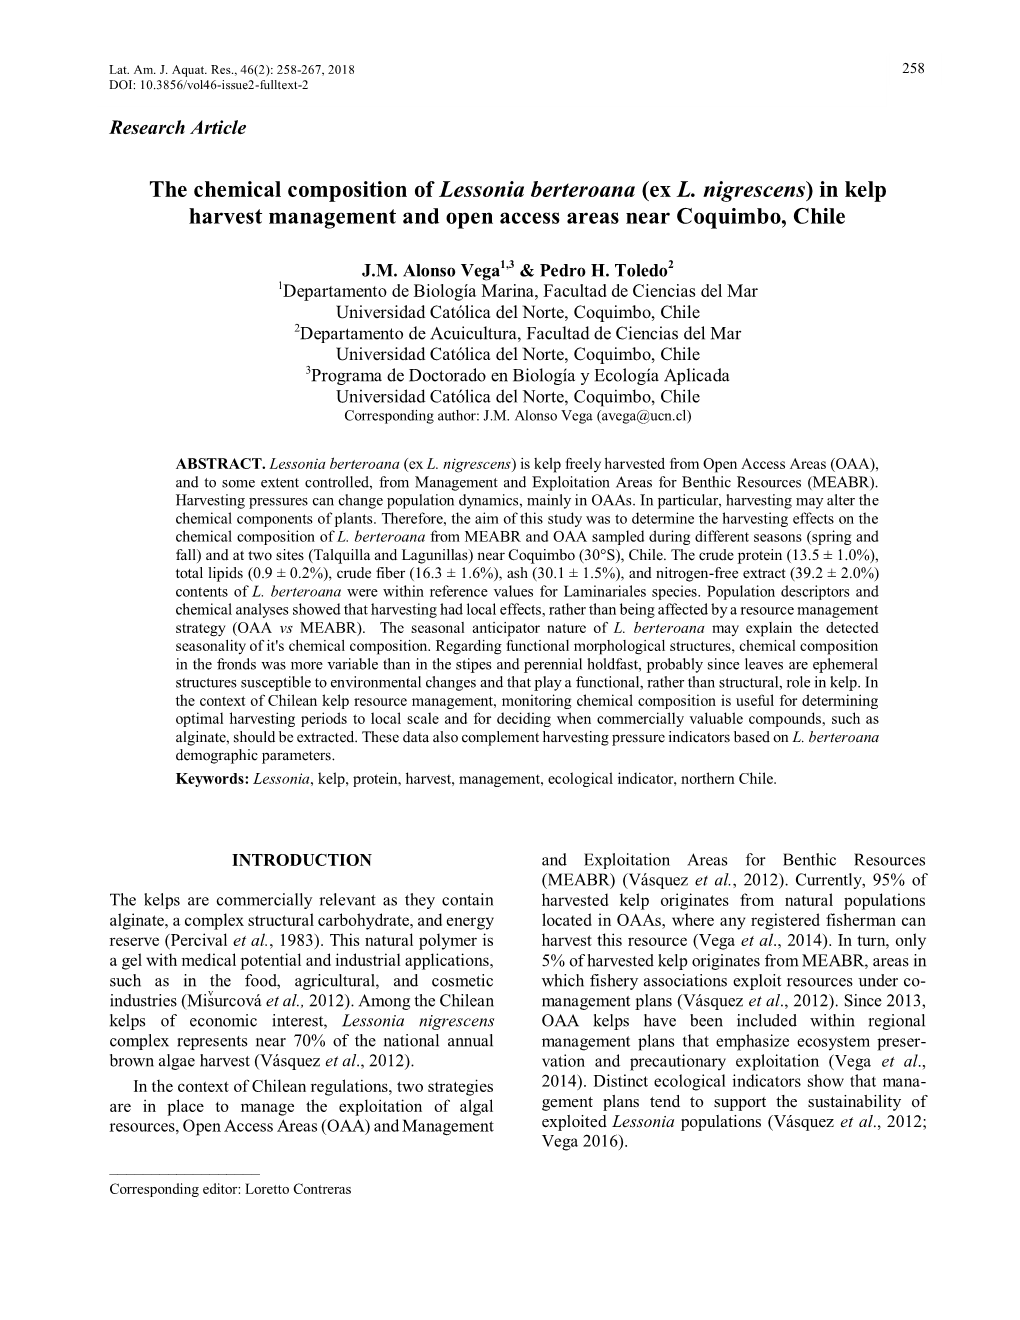 The Chemical Composition of Lessonia Berteroana (Ex L